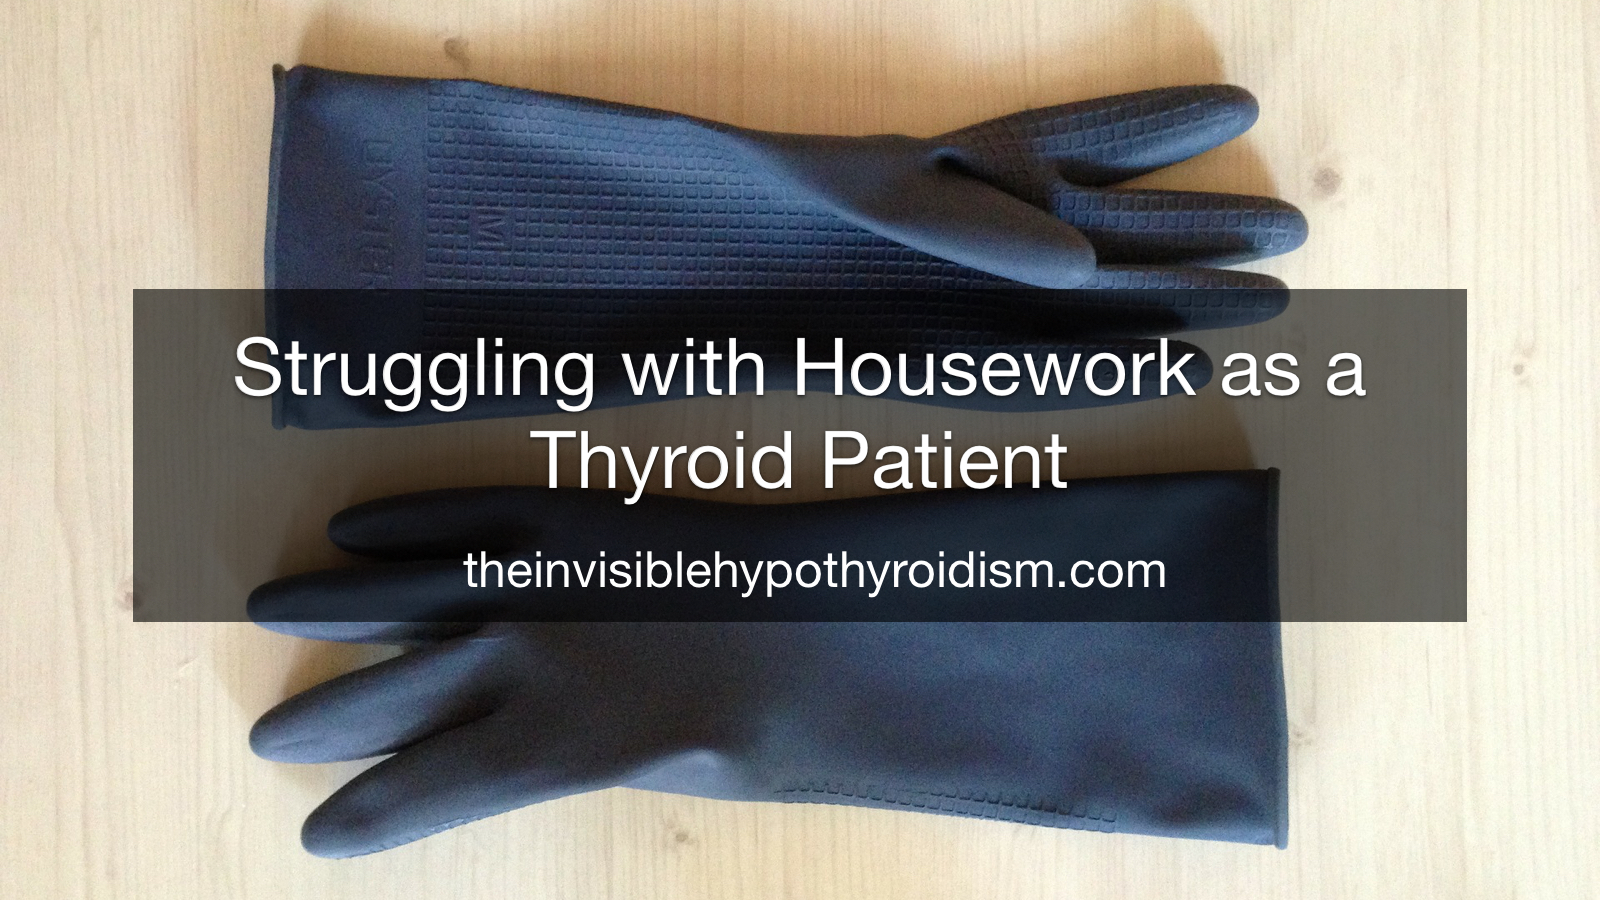 Struggling with Housework as a Thyroid Patient